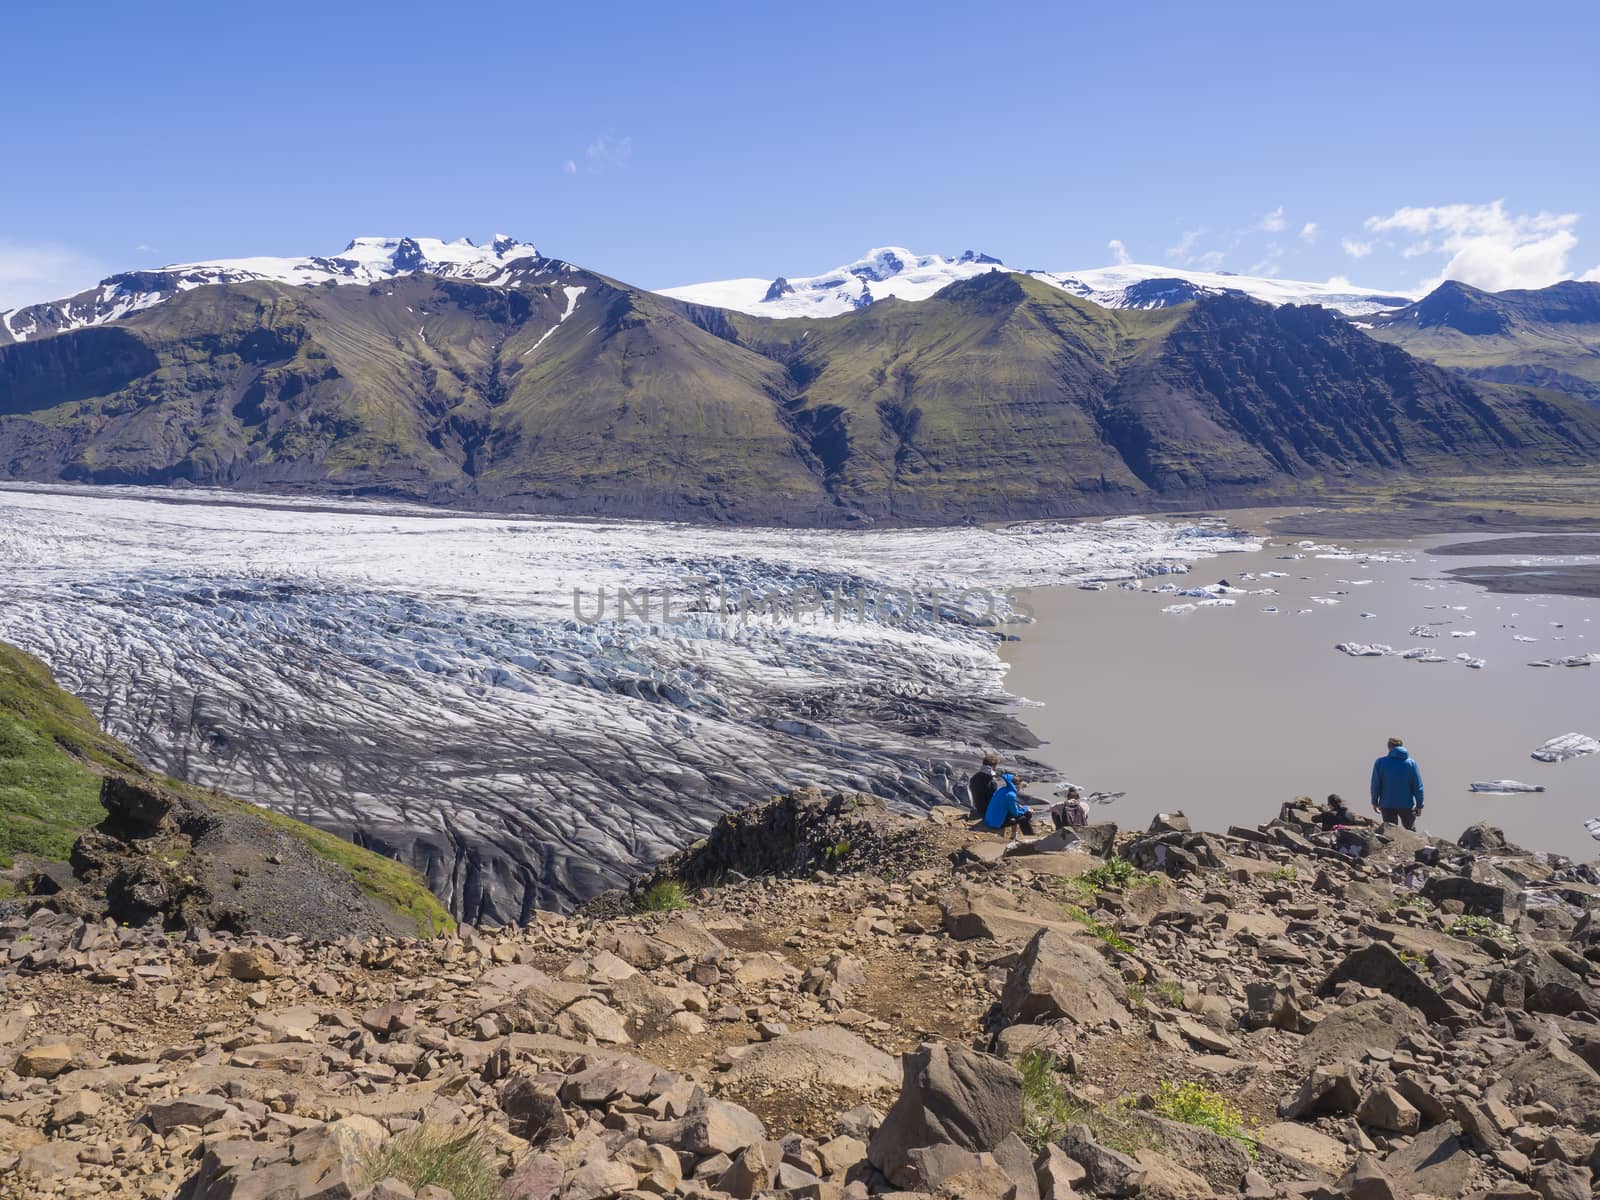 glacier lagoon with icebergs and tongue of Skaftafellsjokull, valley Morsardalur river and colorful rhyolit mountains in Skaftafell national park, Iceland by Henkeova